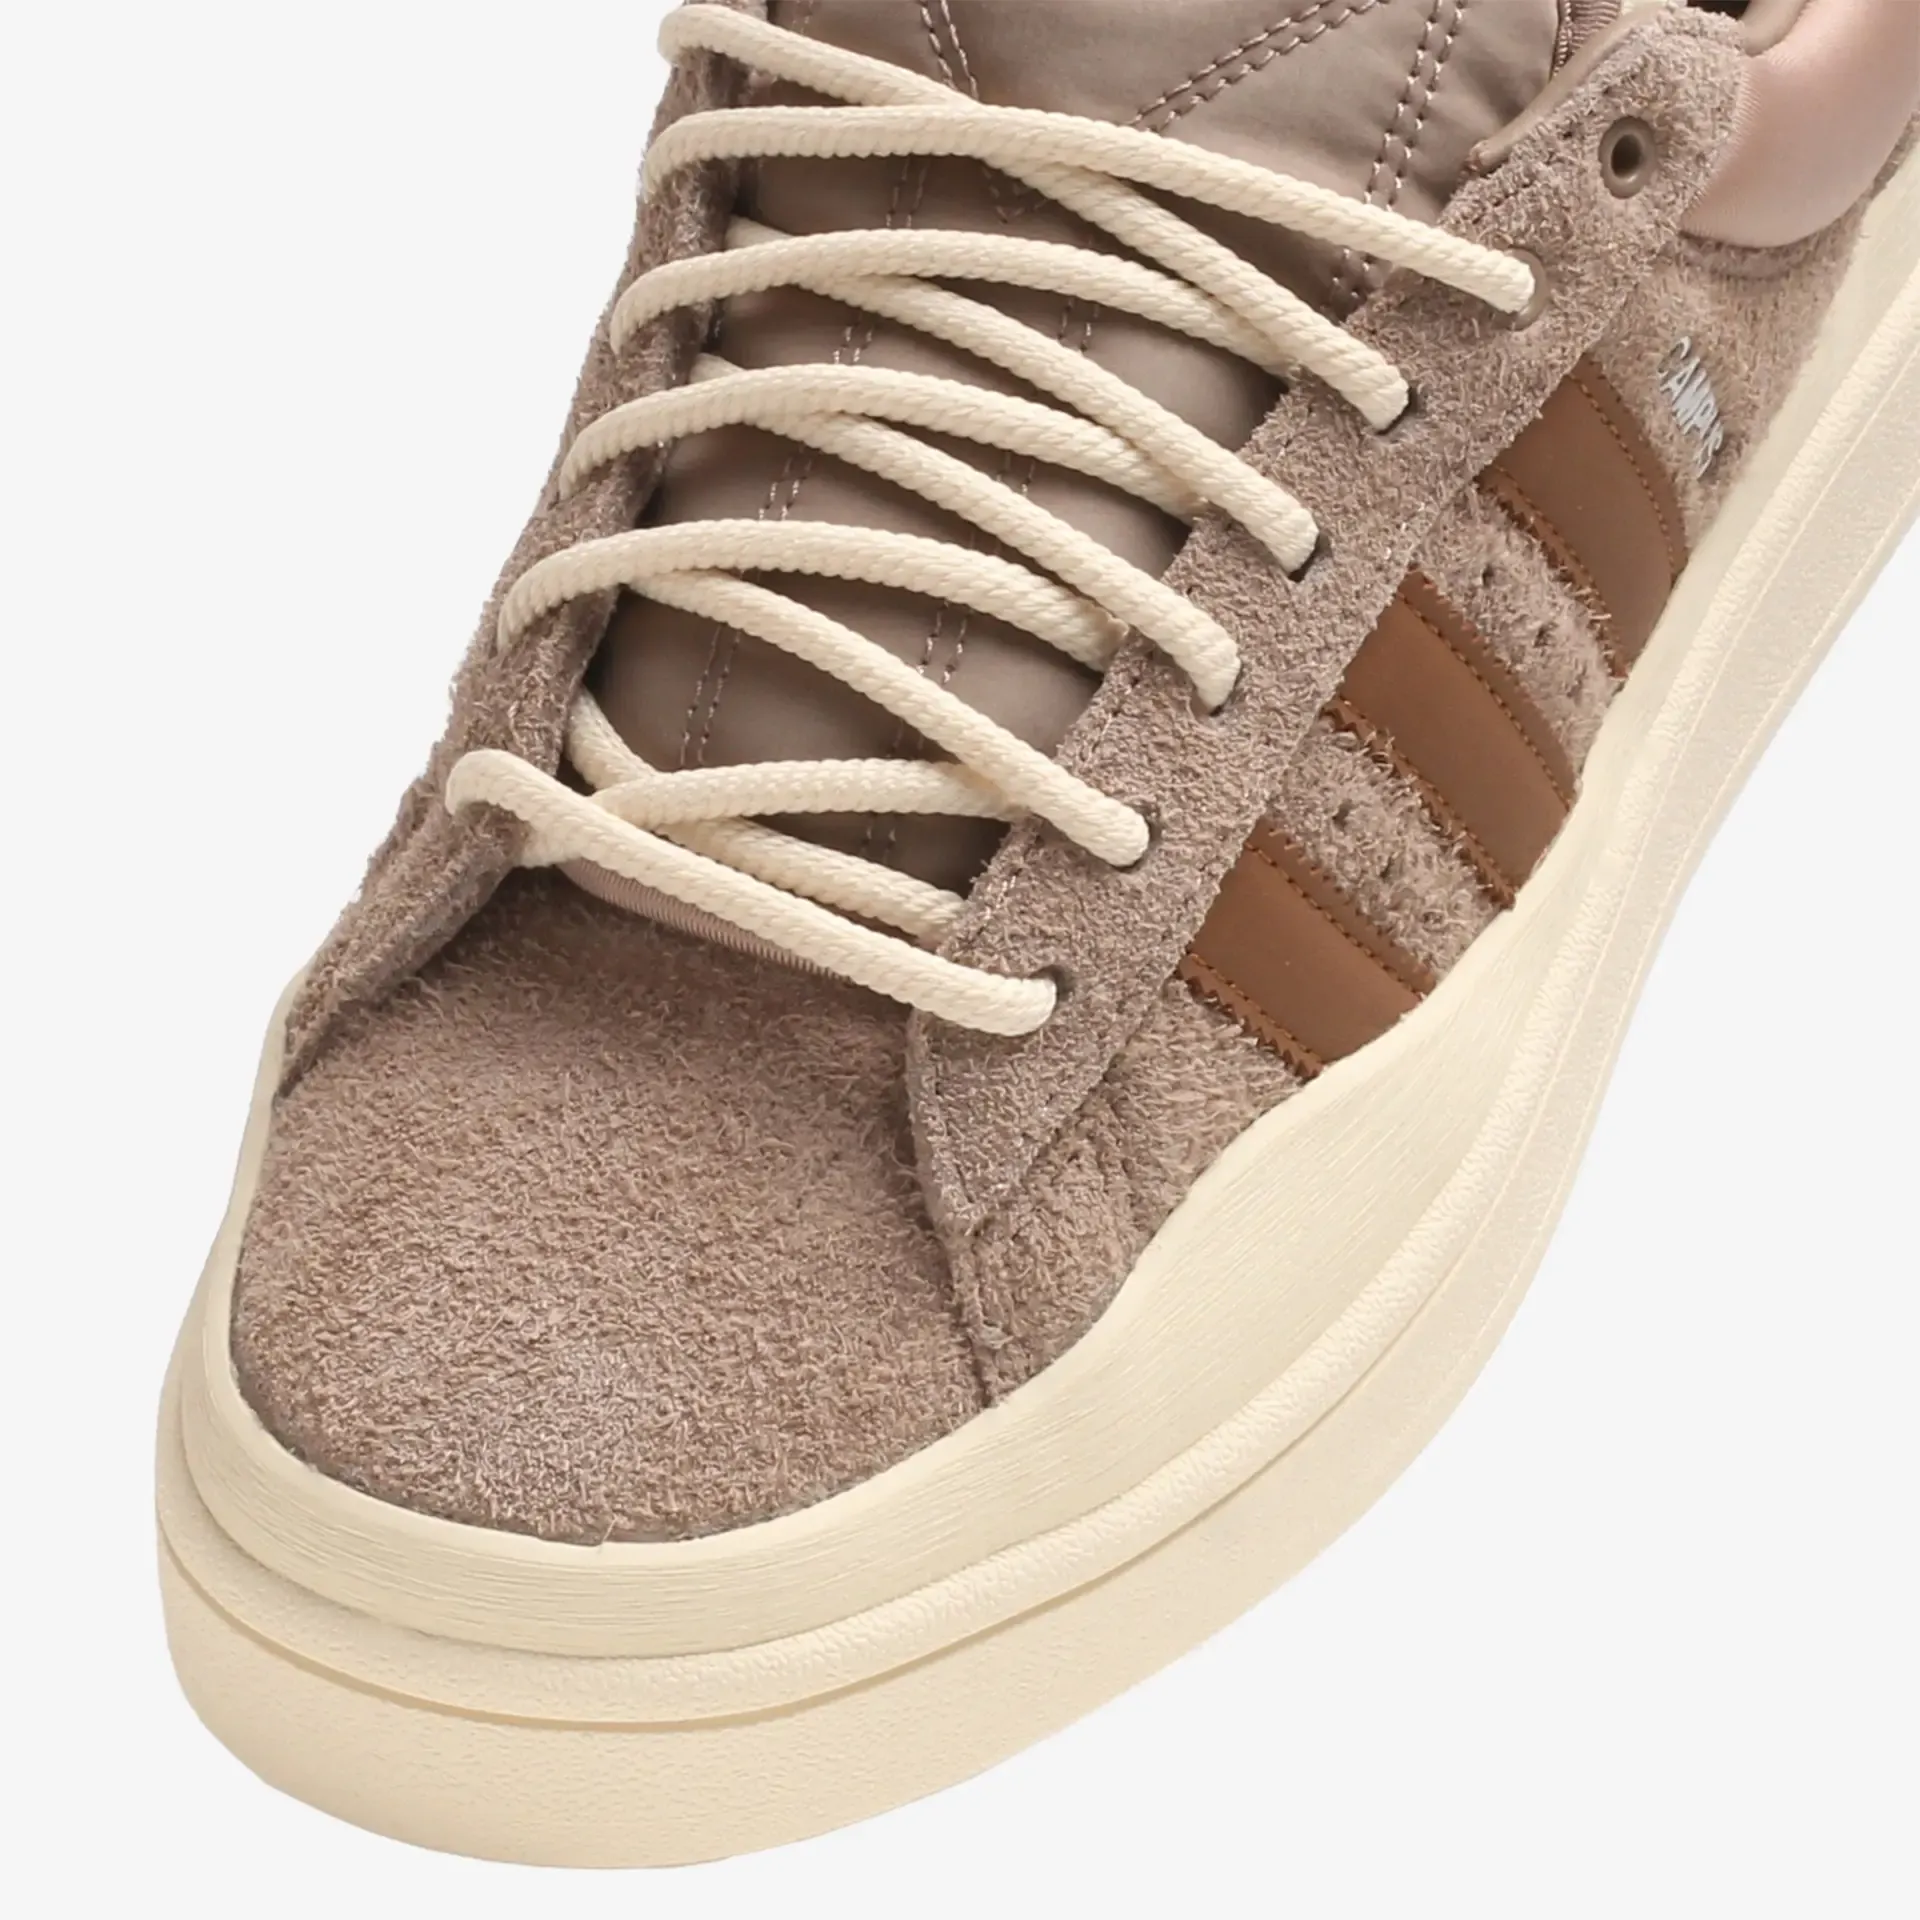 TheSiteSupply Images Bad Bunny Adidas Campus Brown Suede I D2529 1 Release Info